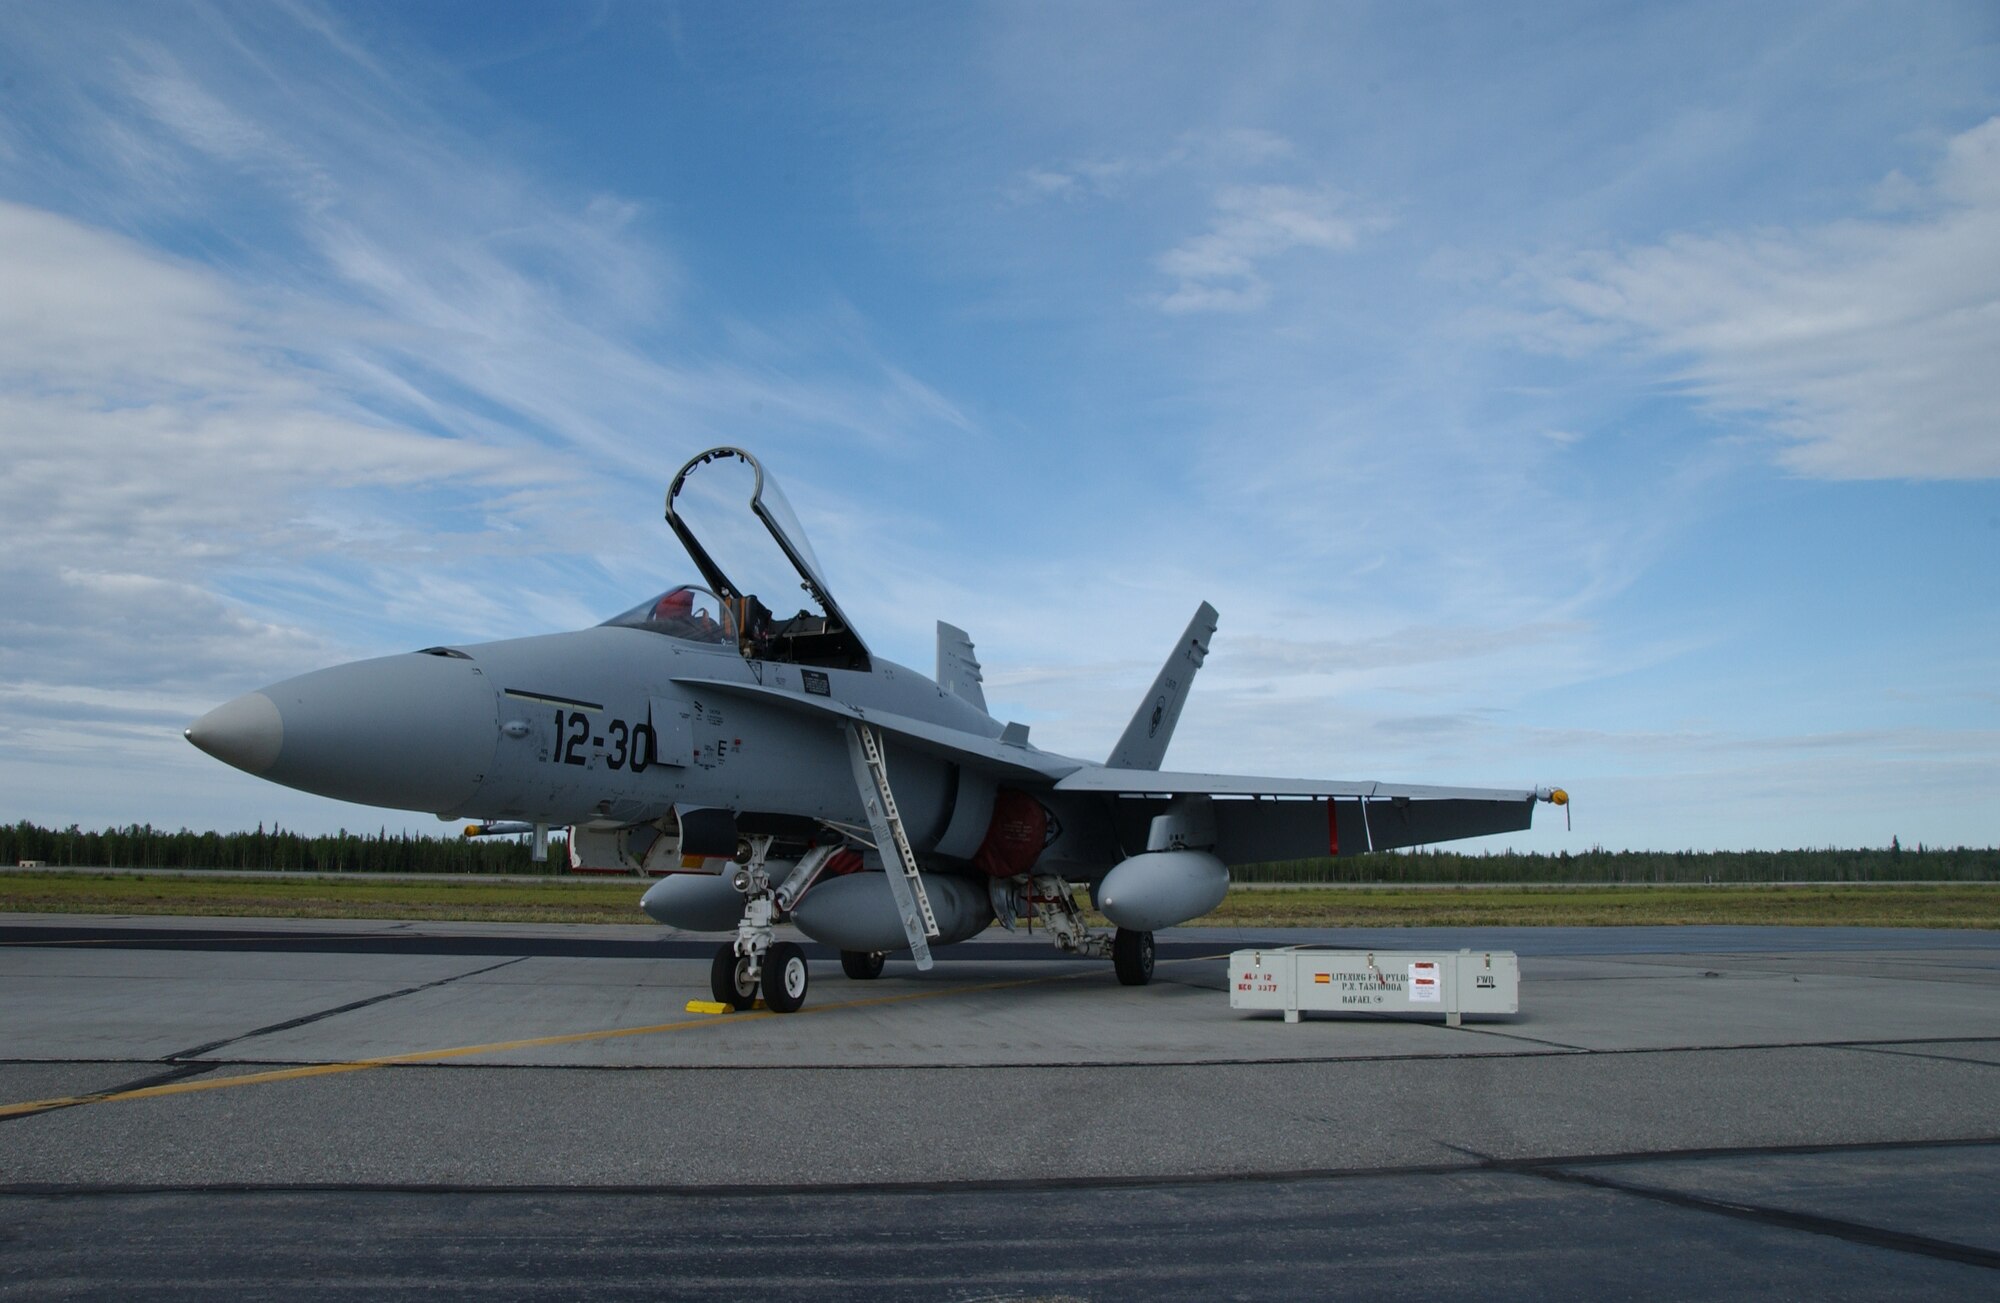 EIELSON AIR FORCE BASE, Alaska -- A Spanish F-18 sits on the flight line waiting to be serviced before a training exercise July 10, 2007. Red Flag-Alaska, a series of Pacific Air Forces commander-directed field training exercises for U.S. forces, provides joint offensive counter-air, interdiction, close air support, and large force employment training in a simulated combat environment.  (U.S. Air Force photo by Airman 1st Class Christopher Griffin)